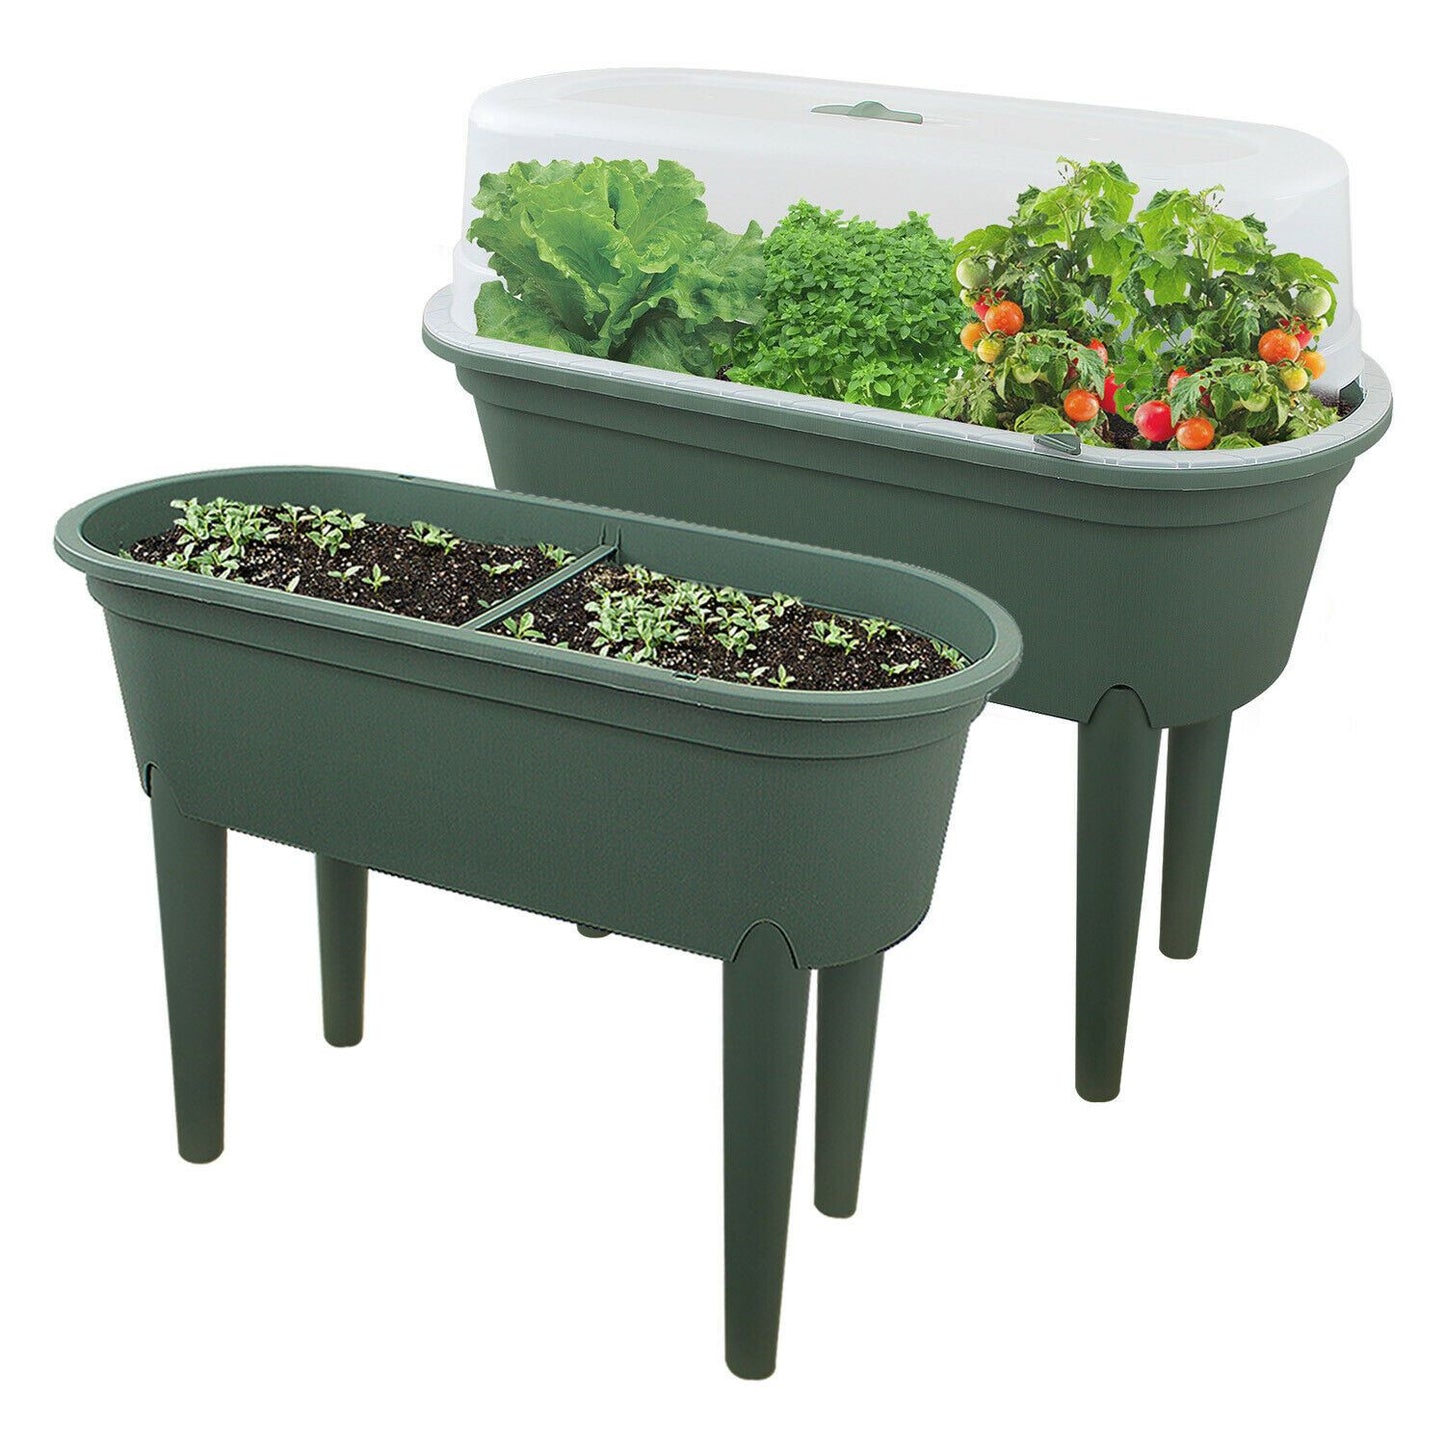 Green Colour Greenhouse Table With Lid by Geezy - UKBuyZone